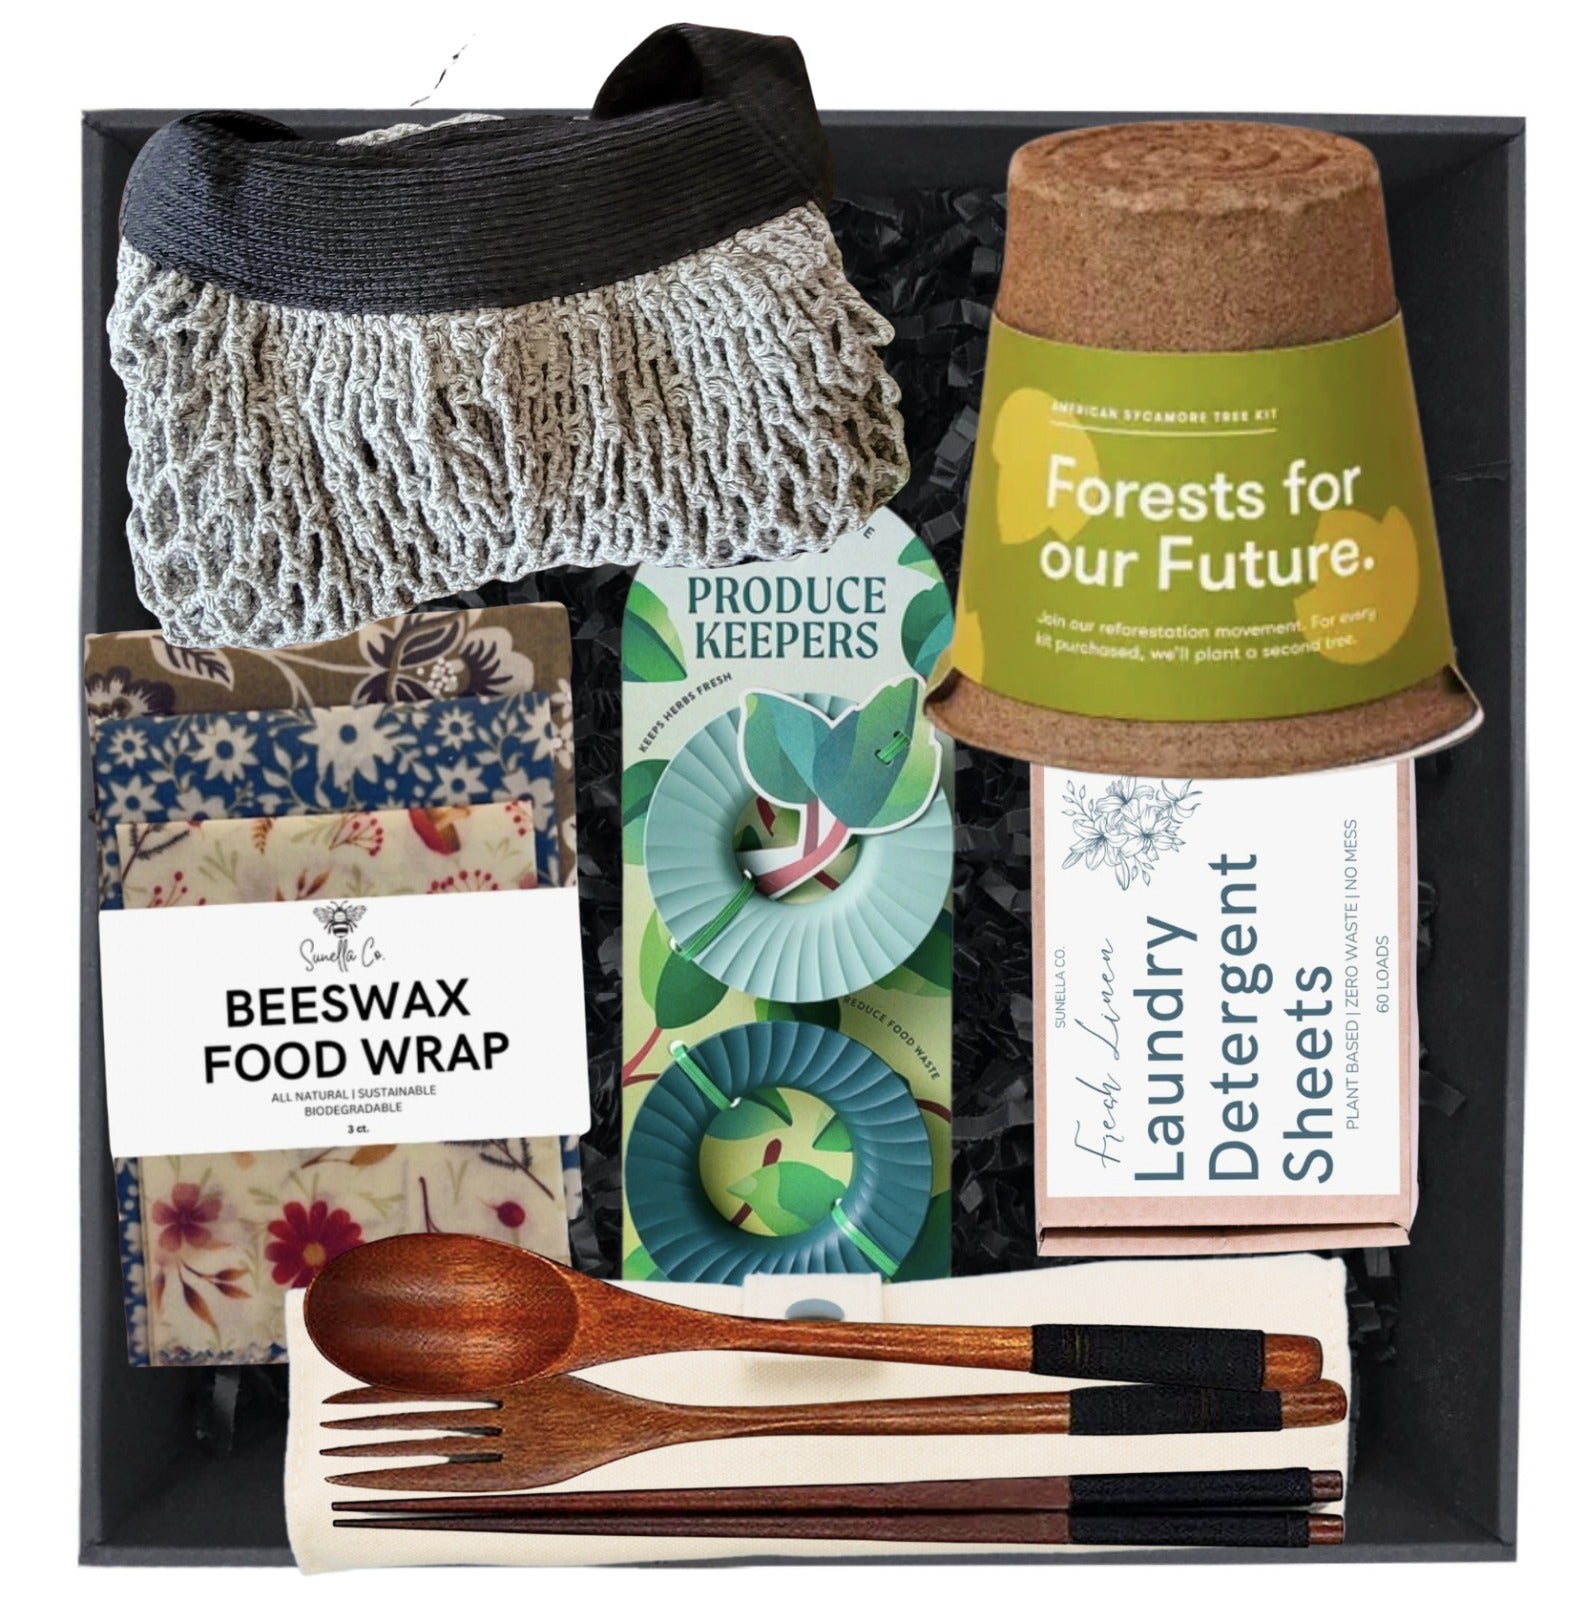 Eco-Friendly Corporate Gifts For Employees | Chalo Green